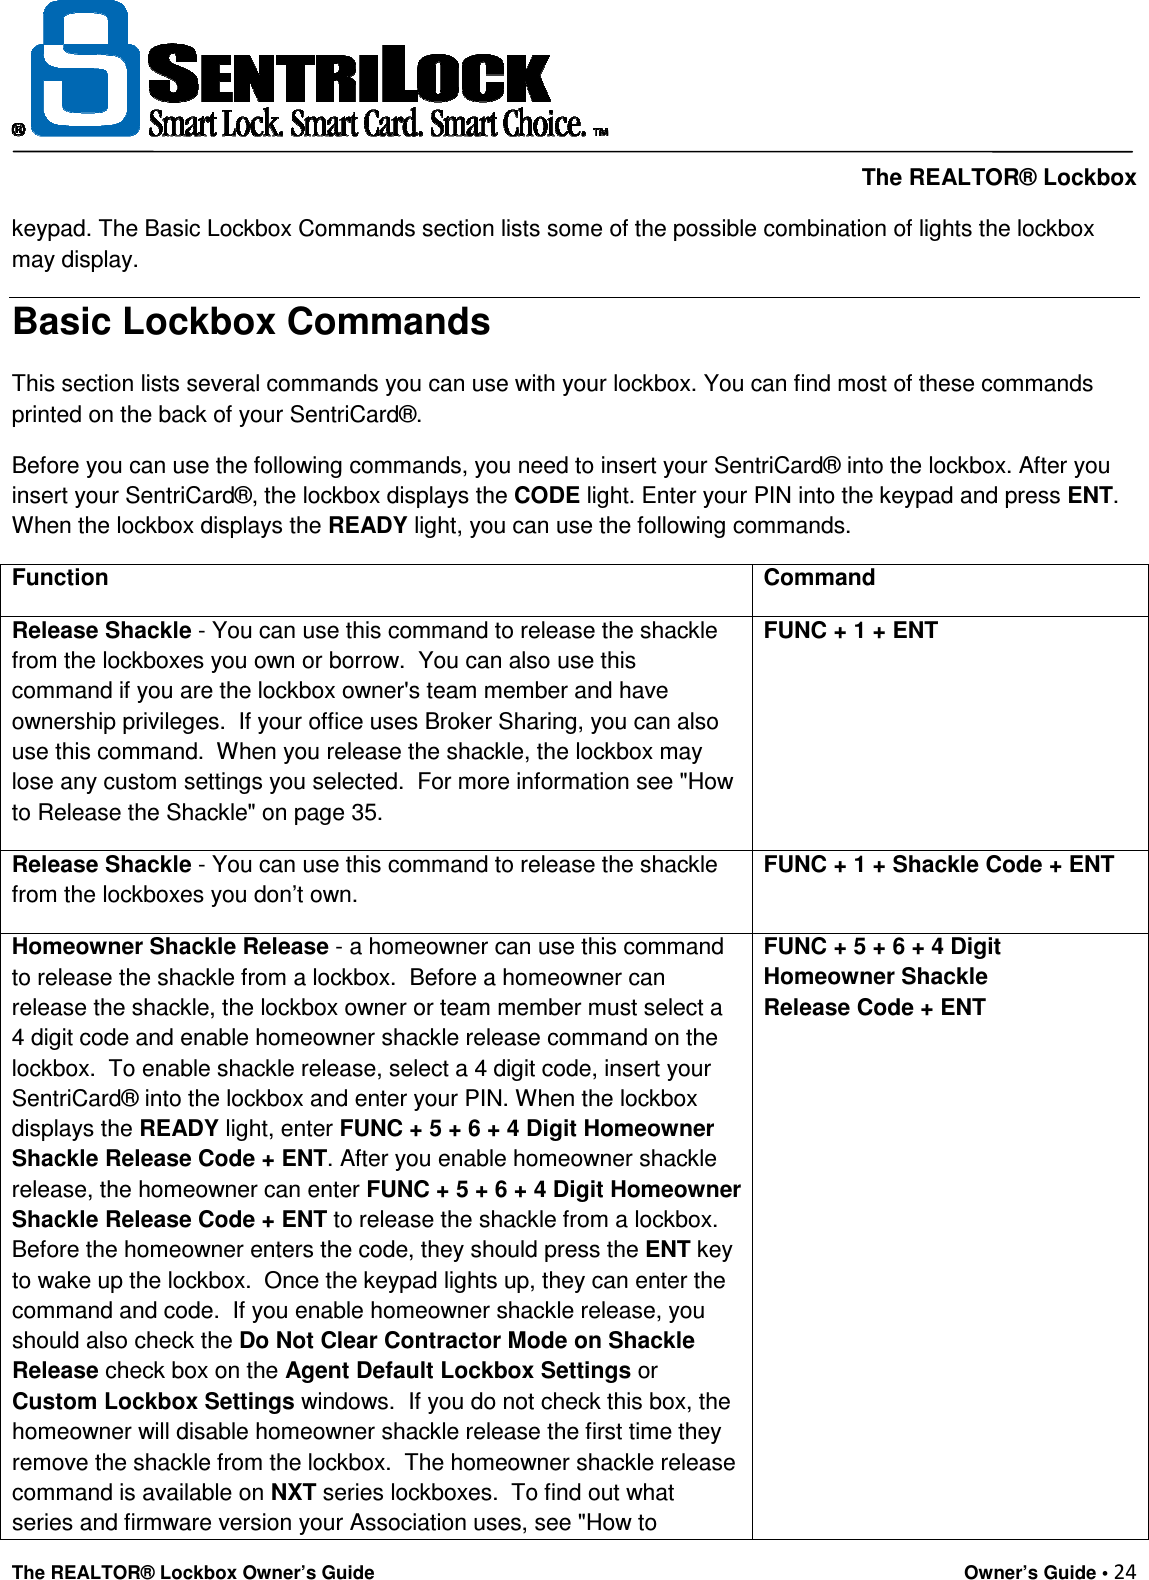     The REALTOR® Lockbox The REALTOR® Lockbox Owner’s Guide    Owner’s Guide • 24  keypad. The Basic Lockbox Commands section lists some of the possible combination of lights the lockbox may display.  Basic Lockbox Commands This section lists several commands you can use with your lockbox. You can find most of these commands printed on the back of your SentriCard®.  Before you can use the following commands, you need to insert your SentriCard® into the lockbox. After you insert your SentriCard®, the lockbox displays the CODE light. Enter your PIN into the keypad and press ENT. When the lockbox displays the READY light, you can use the following commands. Function   Command  Release Shackle - You can use this command to release the shackle from the lockboxes you own or borrow.  You can also use this command if you are the lockbox owner&apos;s team member and have ownership privileges.  If your office uses Broker Sharing, you can also use this command.  When you release the shackle, the lockbox may lose any custom settings you selected.  For more information see &quot;How to Release the Shackle&quot; on page 35. FUNC + 1 + ENT Release Shackle - You can use this command to release the shackle from the lockboxes you don’t own. FUNC + 1 + Shackle Code + ENT Homeowner Shackle Release - a homeowner can use this command to release the shackle from a lockbox.  Before a homeowner can release the shackle, the lockbox owner or team member must select a 4 digit code and enable homeowner shackle release command on the lockbox.  To enable shackle release, select a 4 digit code, insert your SentriCard® into the lockbox and enter your PIN. When the lockbox displays the READY light, enter FUNC + 5 + 6 + 4 Digit Homeowner Shackle Release Code + ENT. After you enable homeowner shackle release, the homeowner can enter FUNC + 5 + 6 + 4 Digit Homeowner Shackle Release Code + ENT to release the shackle from a lockbox. Before the homeowner enters the code, they should press the ENT key to wake up the lockbox.  Once the keypad lights up, they can enter the command and code.  If you enable homeowner shackle release, you should also check the Do Not Clear Contractor Mode on Shackle Release check box on the Agent Default Lockbox Settings or Custom Lockbox Settings windows.  If you do not check this box, the homeowner will disable homeowner shackle release the first time they remove the shackle from the lockbox.  The homeowner shackle release command is available on NXT series lockboxes.  To find out what series and firmware version your Association uses, see &quot;How to FUNC + 5 + 6 + 4 Digit Homeowner Shackle          Release Code + ENT 